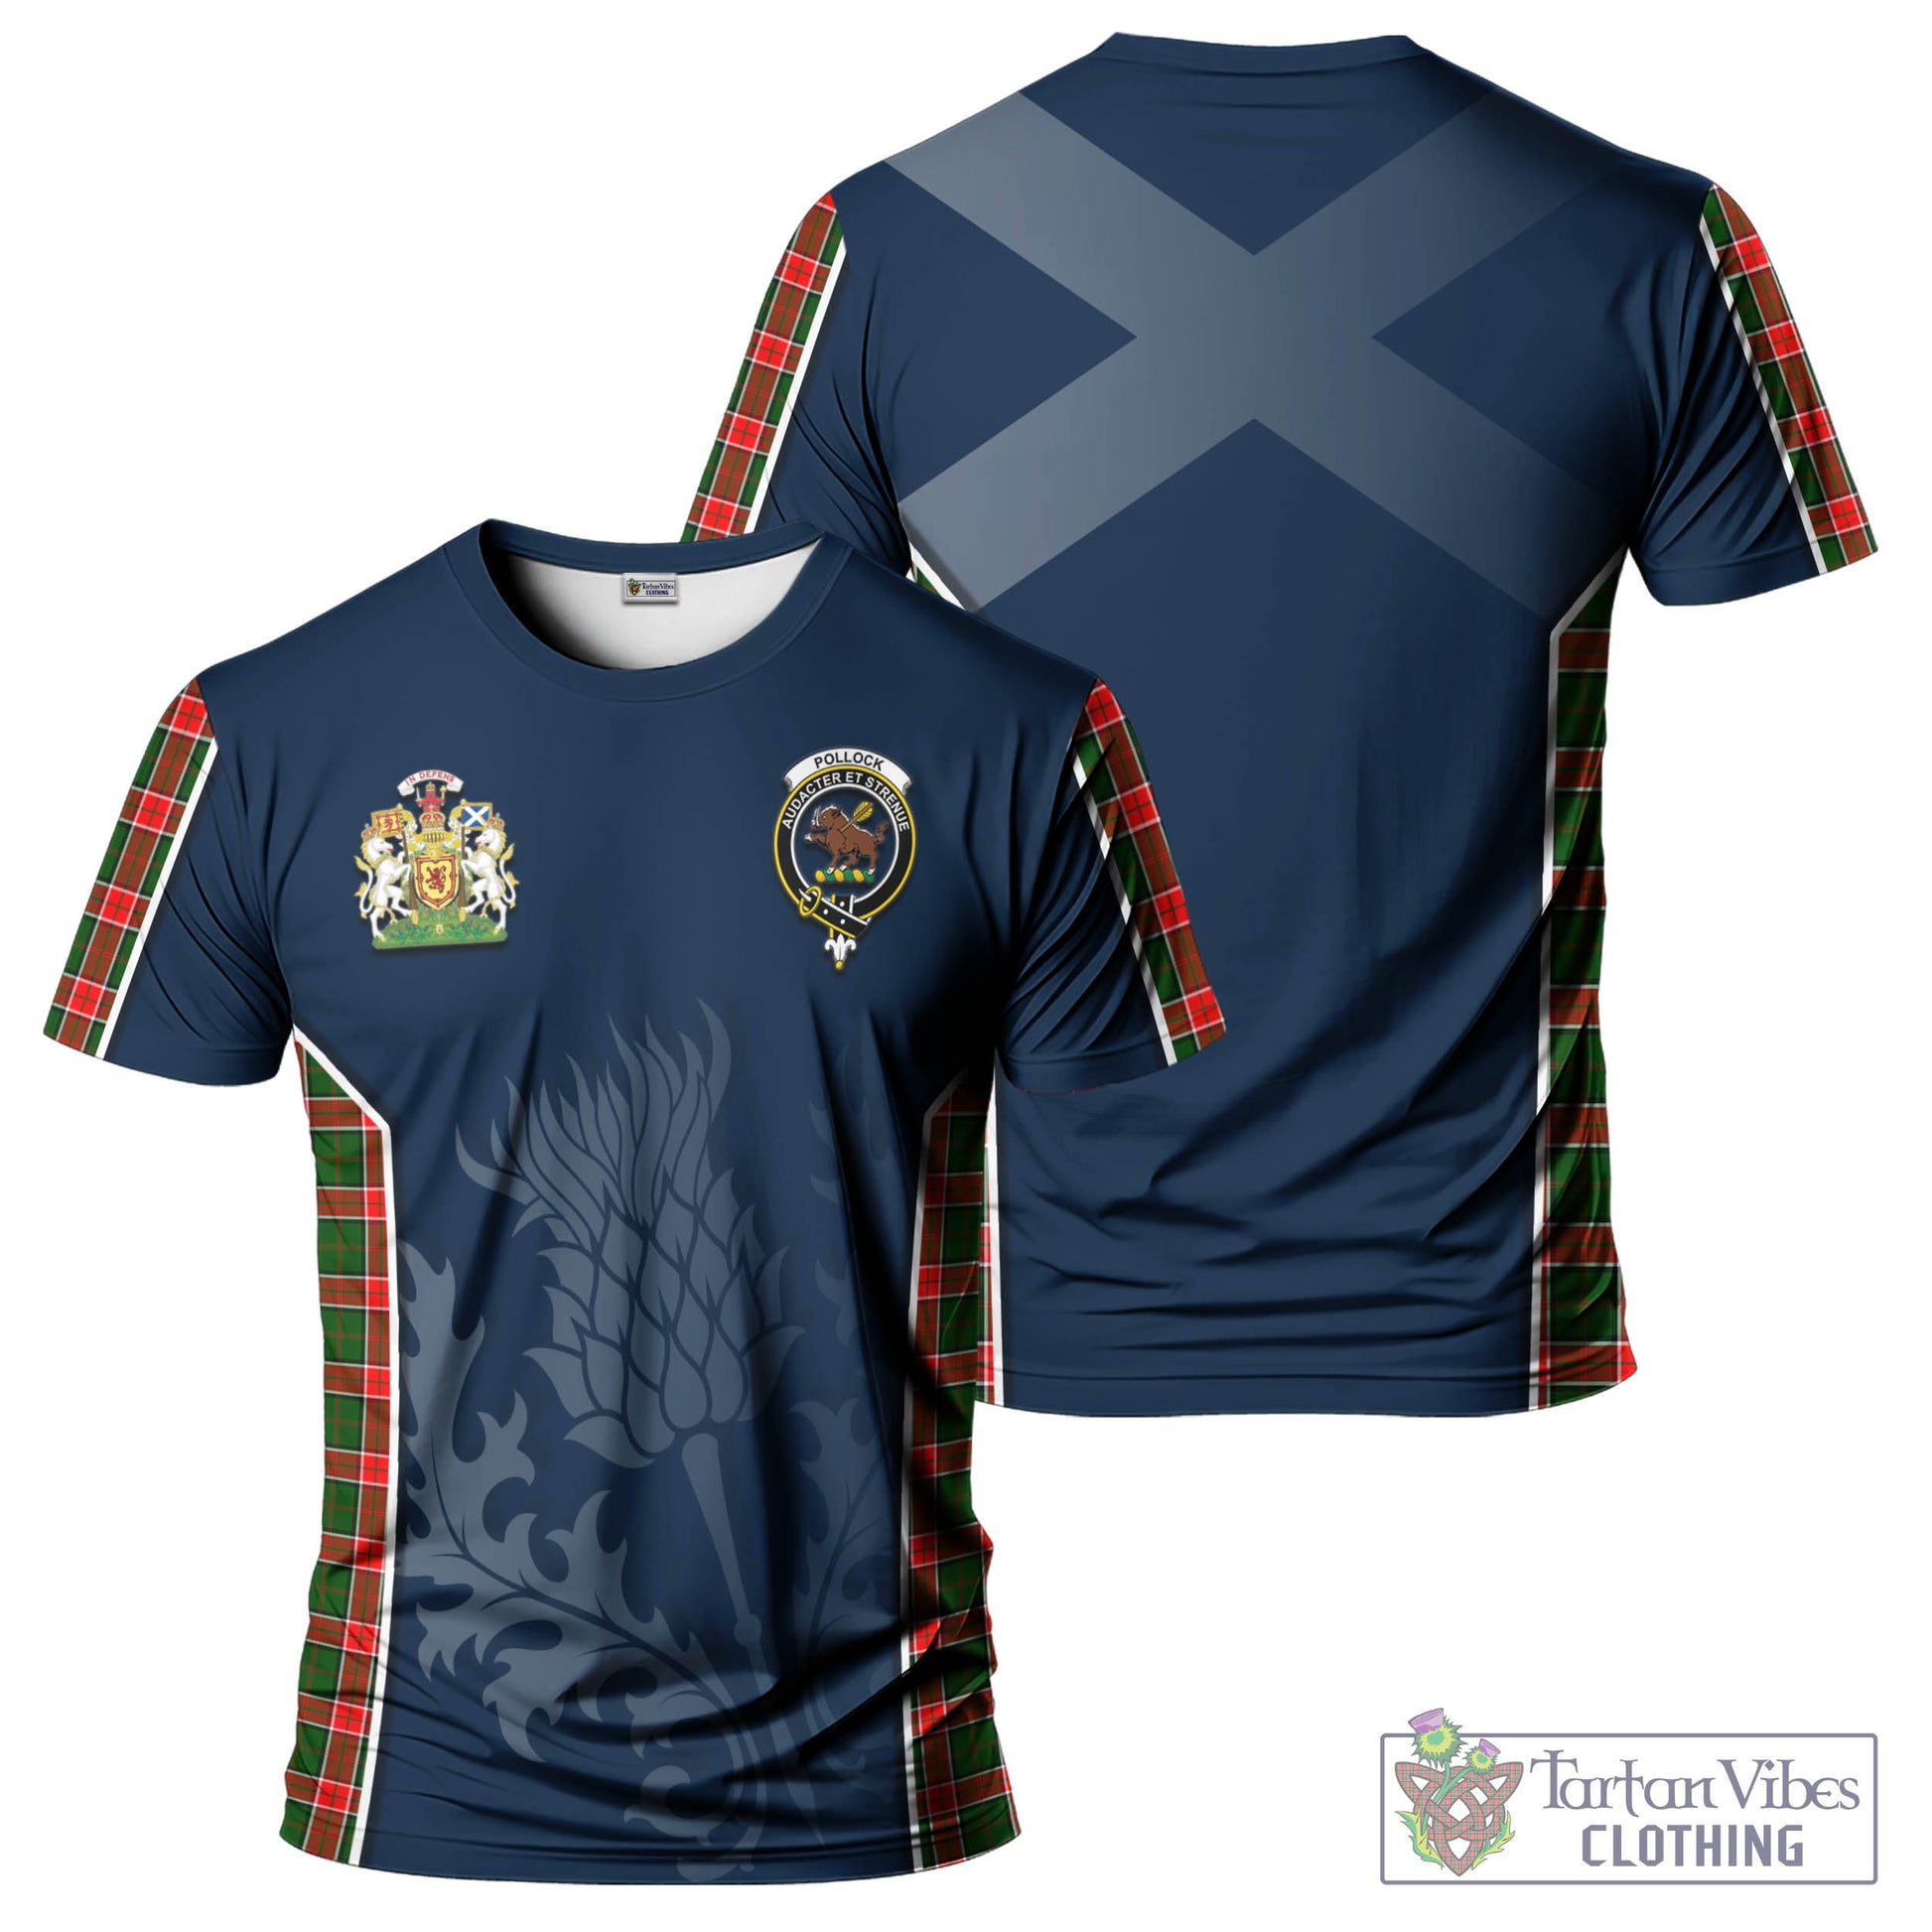 Tartan Vibes Clothing Pollock Modern Tartan T-Shirt with Family Crest and Scottish Thistle Vibes Sport Style